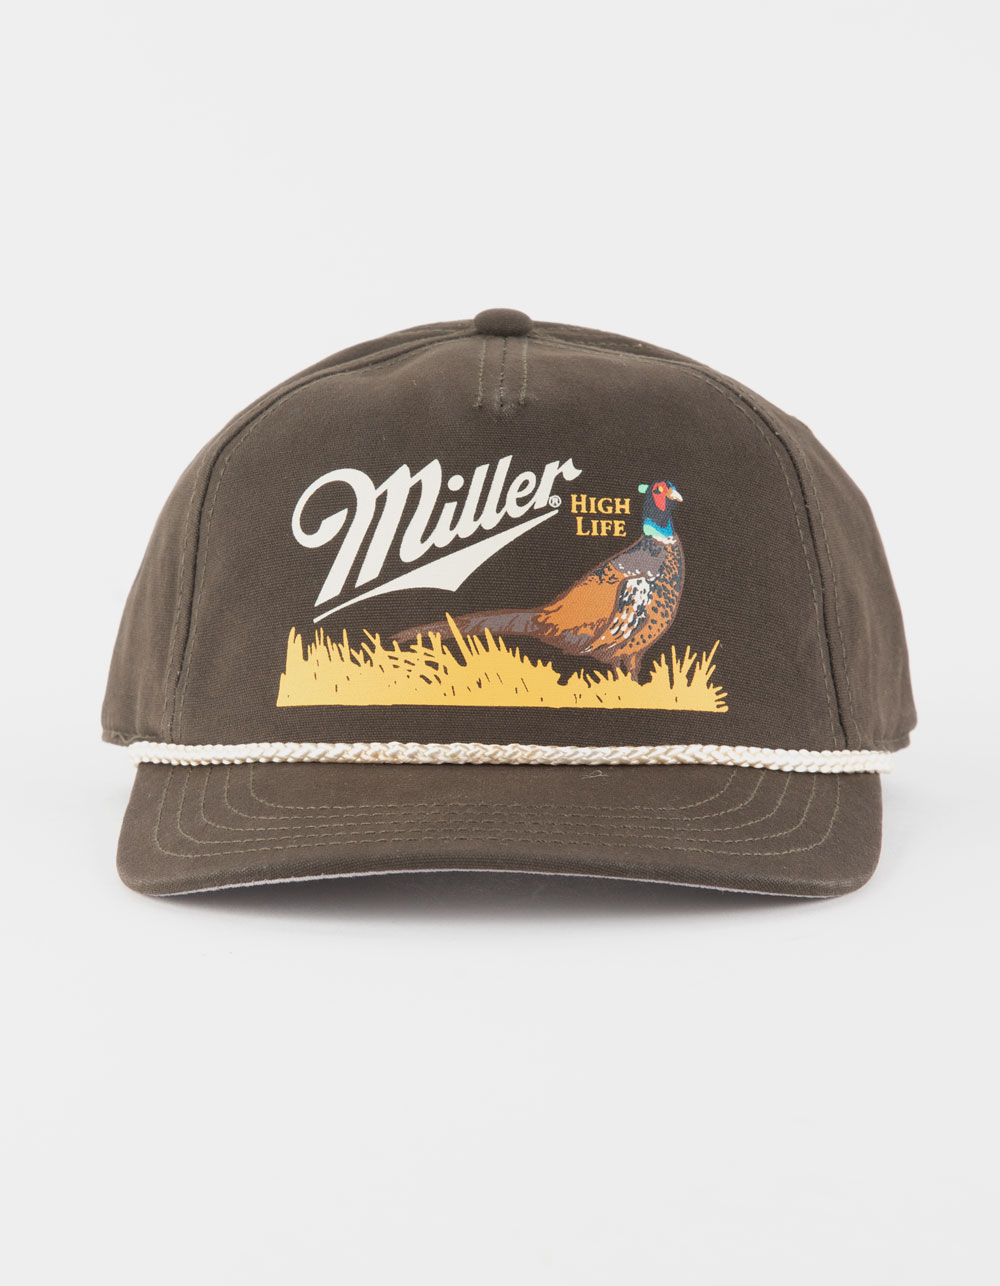 AMERICAN NEEDLE Miller High Life Canvas Cappy Mens Snapback Hat - OLIVE